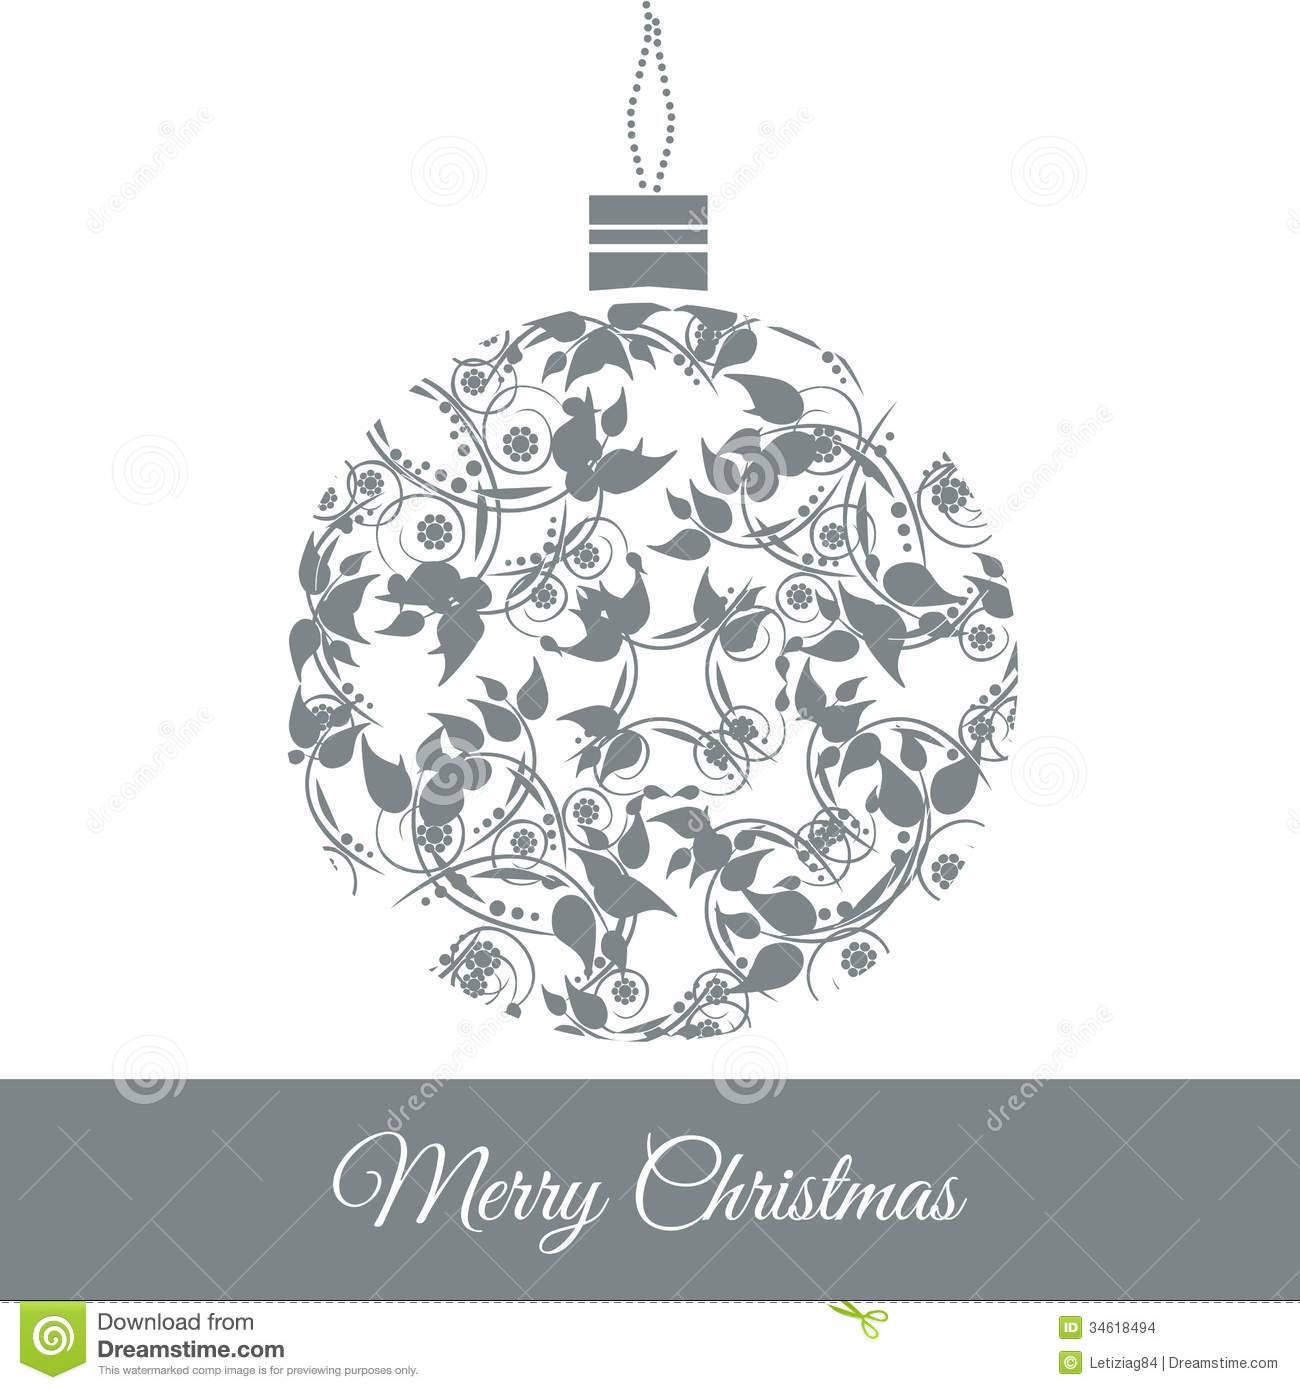 Christmas Black and White Graphic Designs